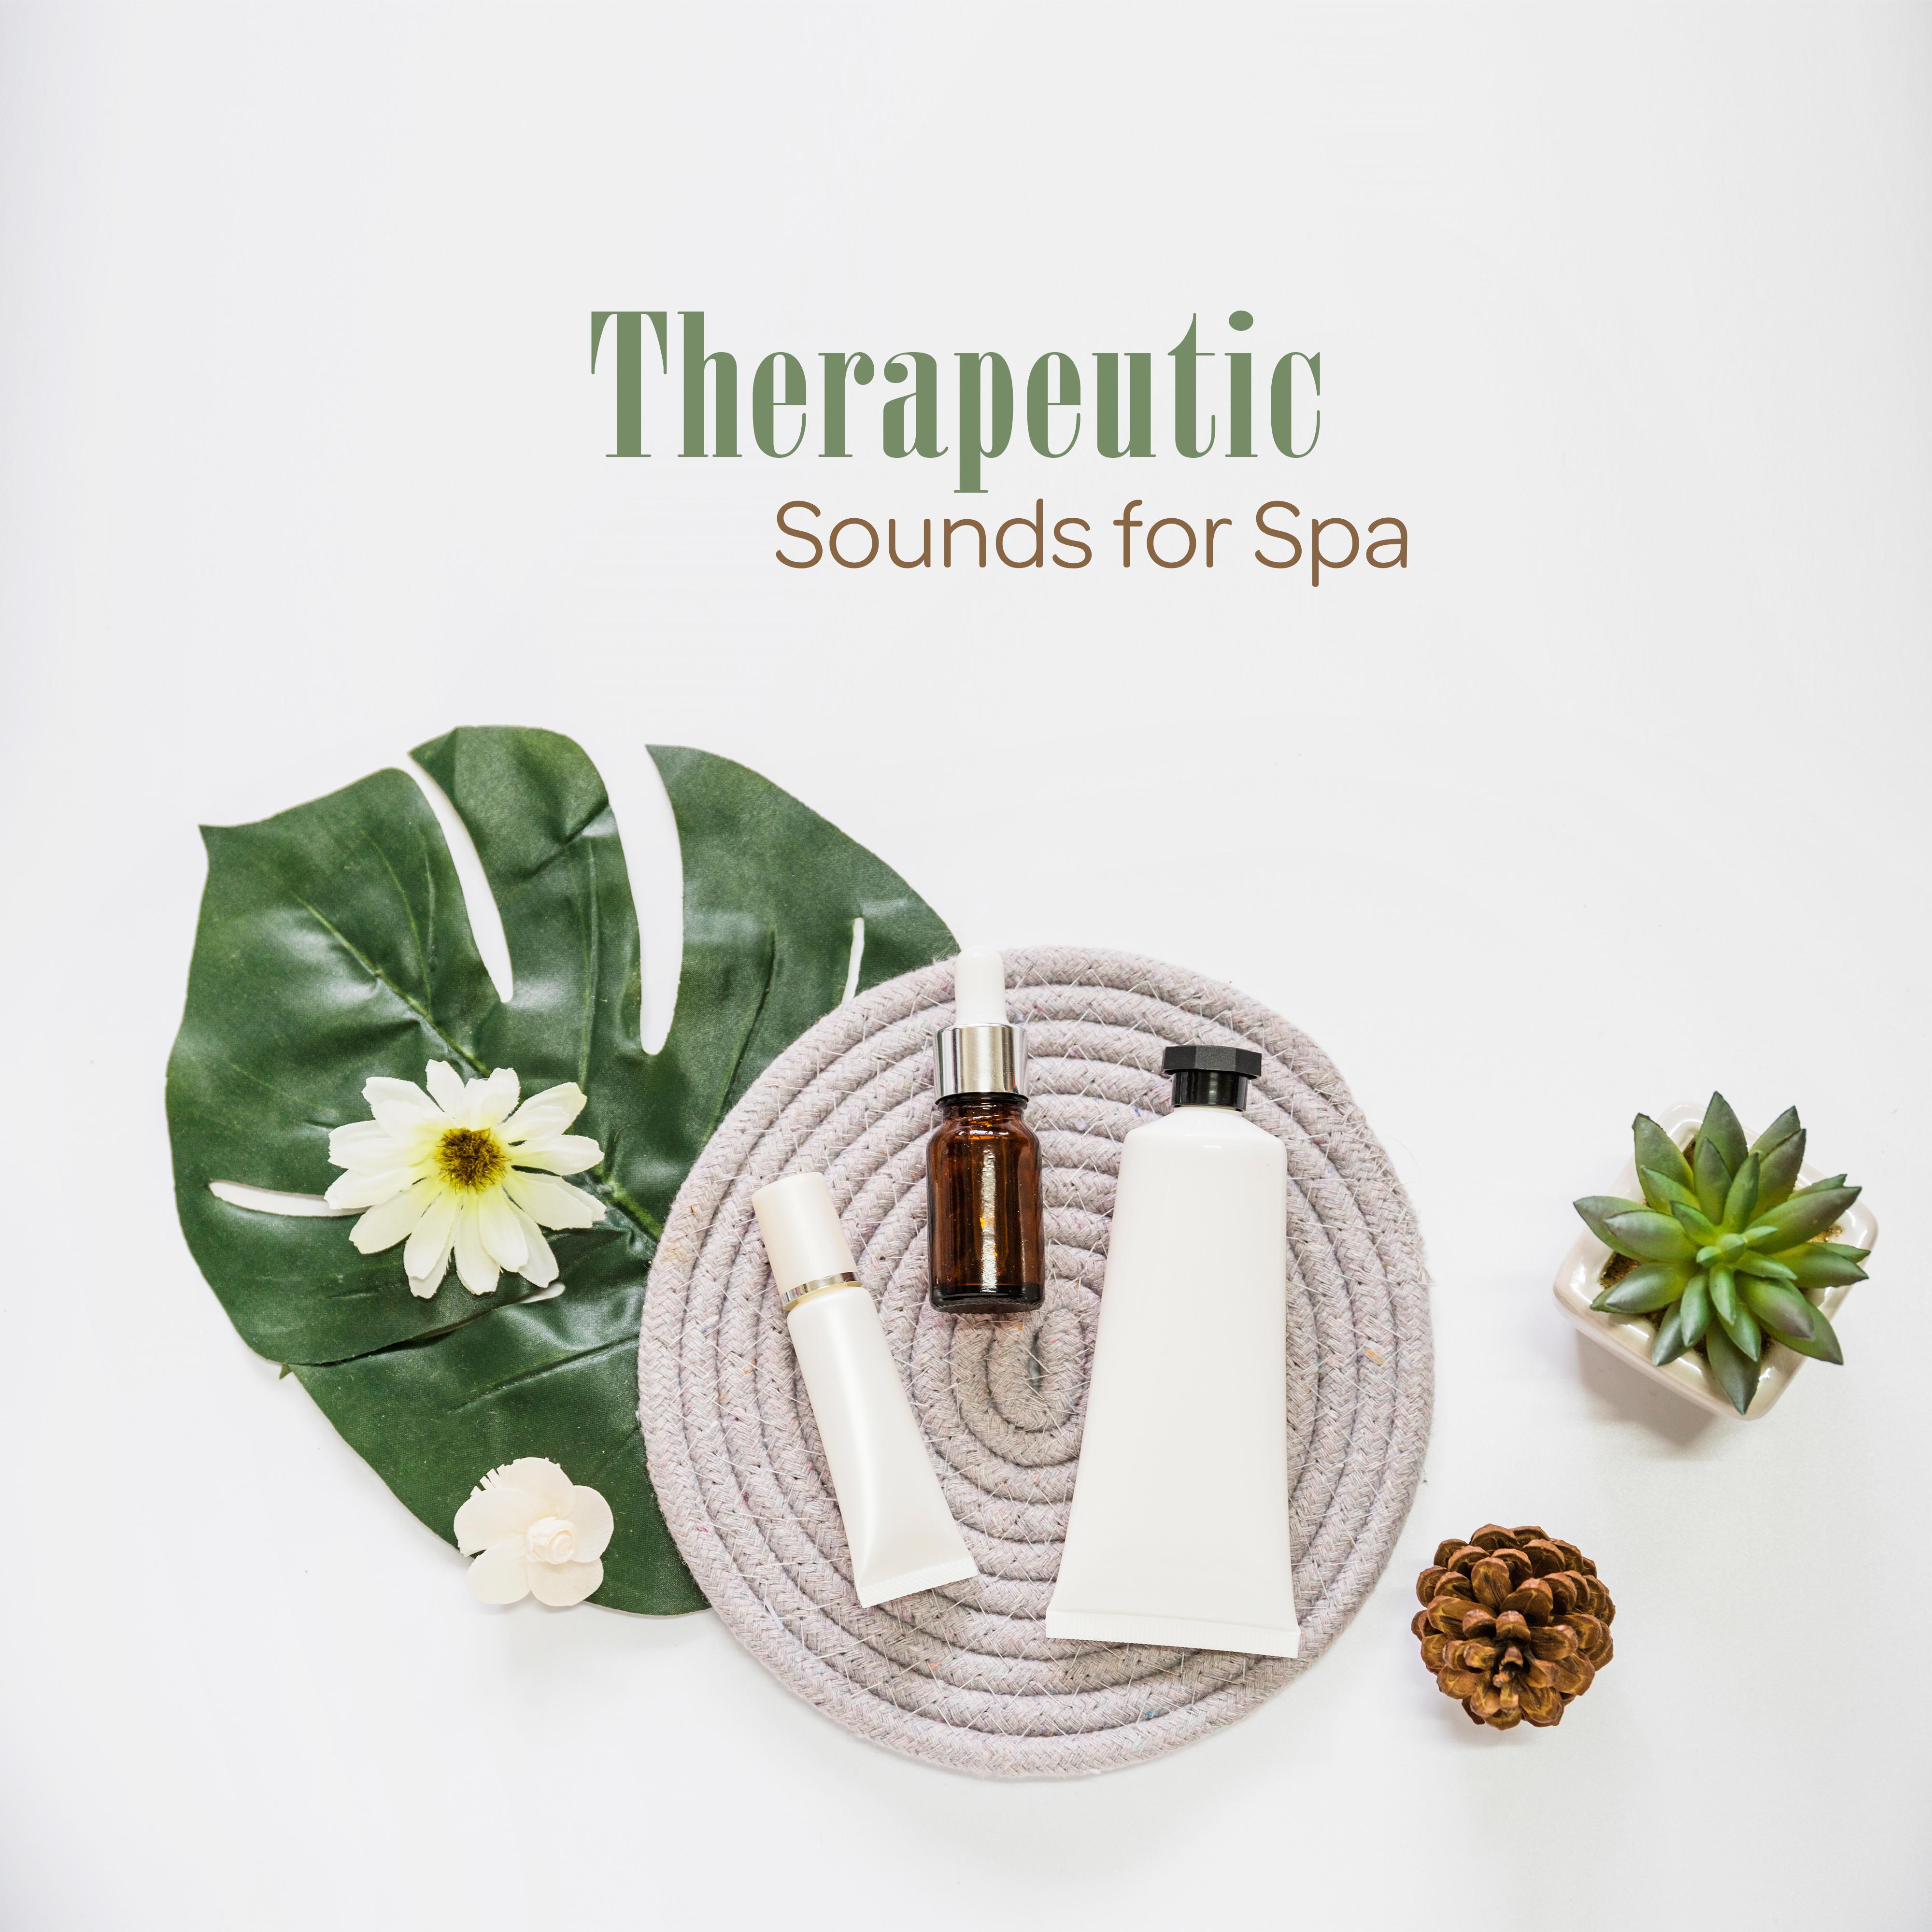 Therapeutic Sounds for Spa